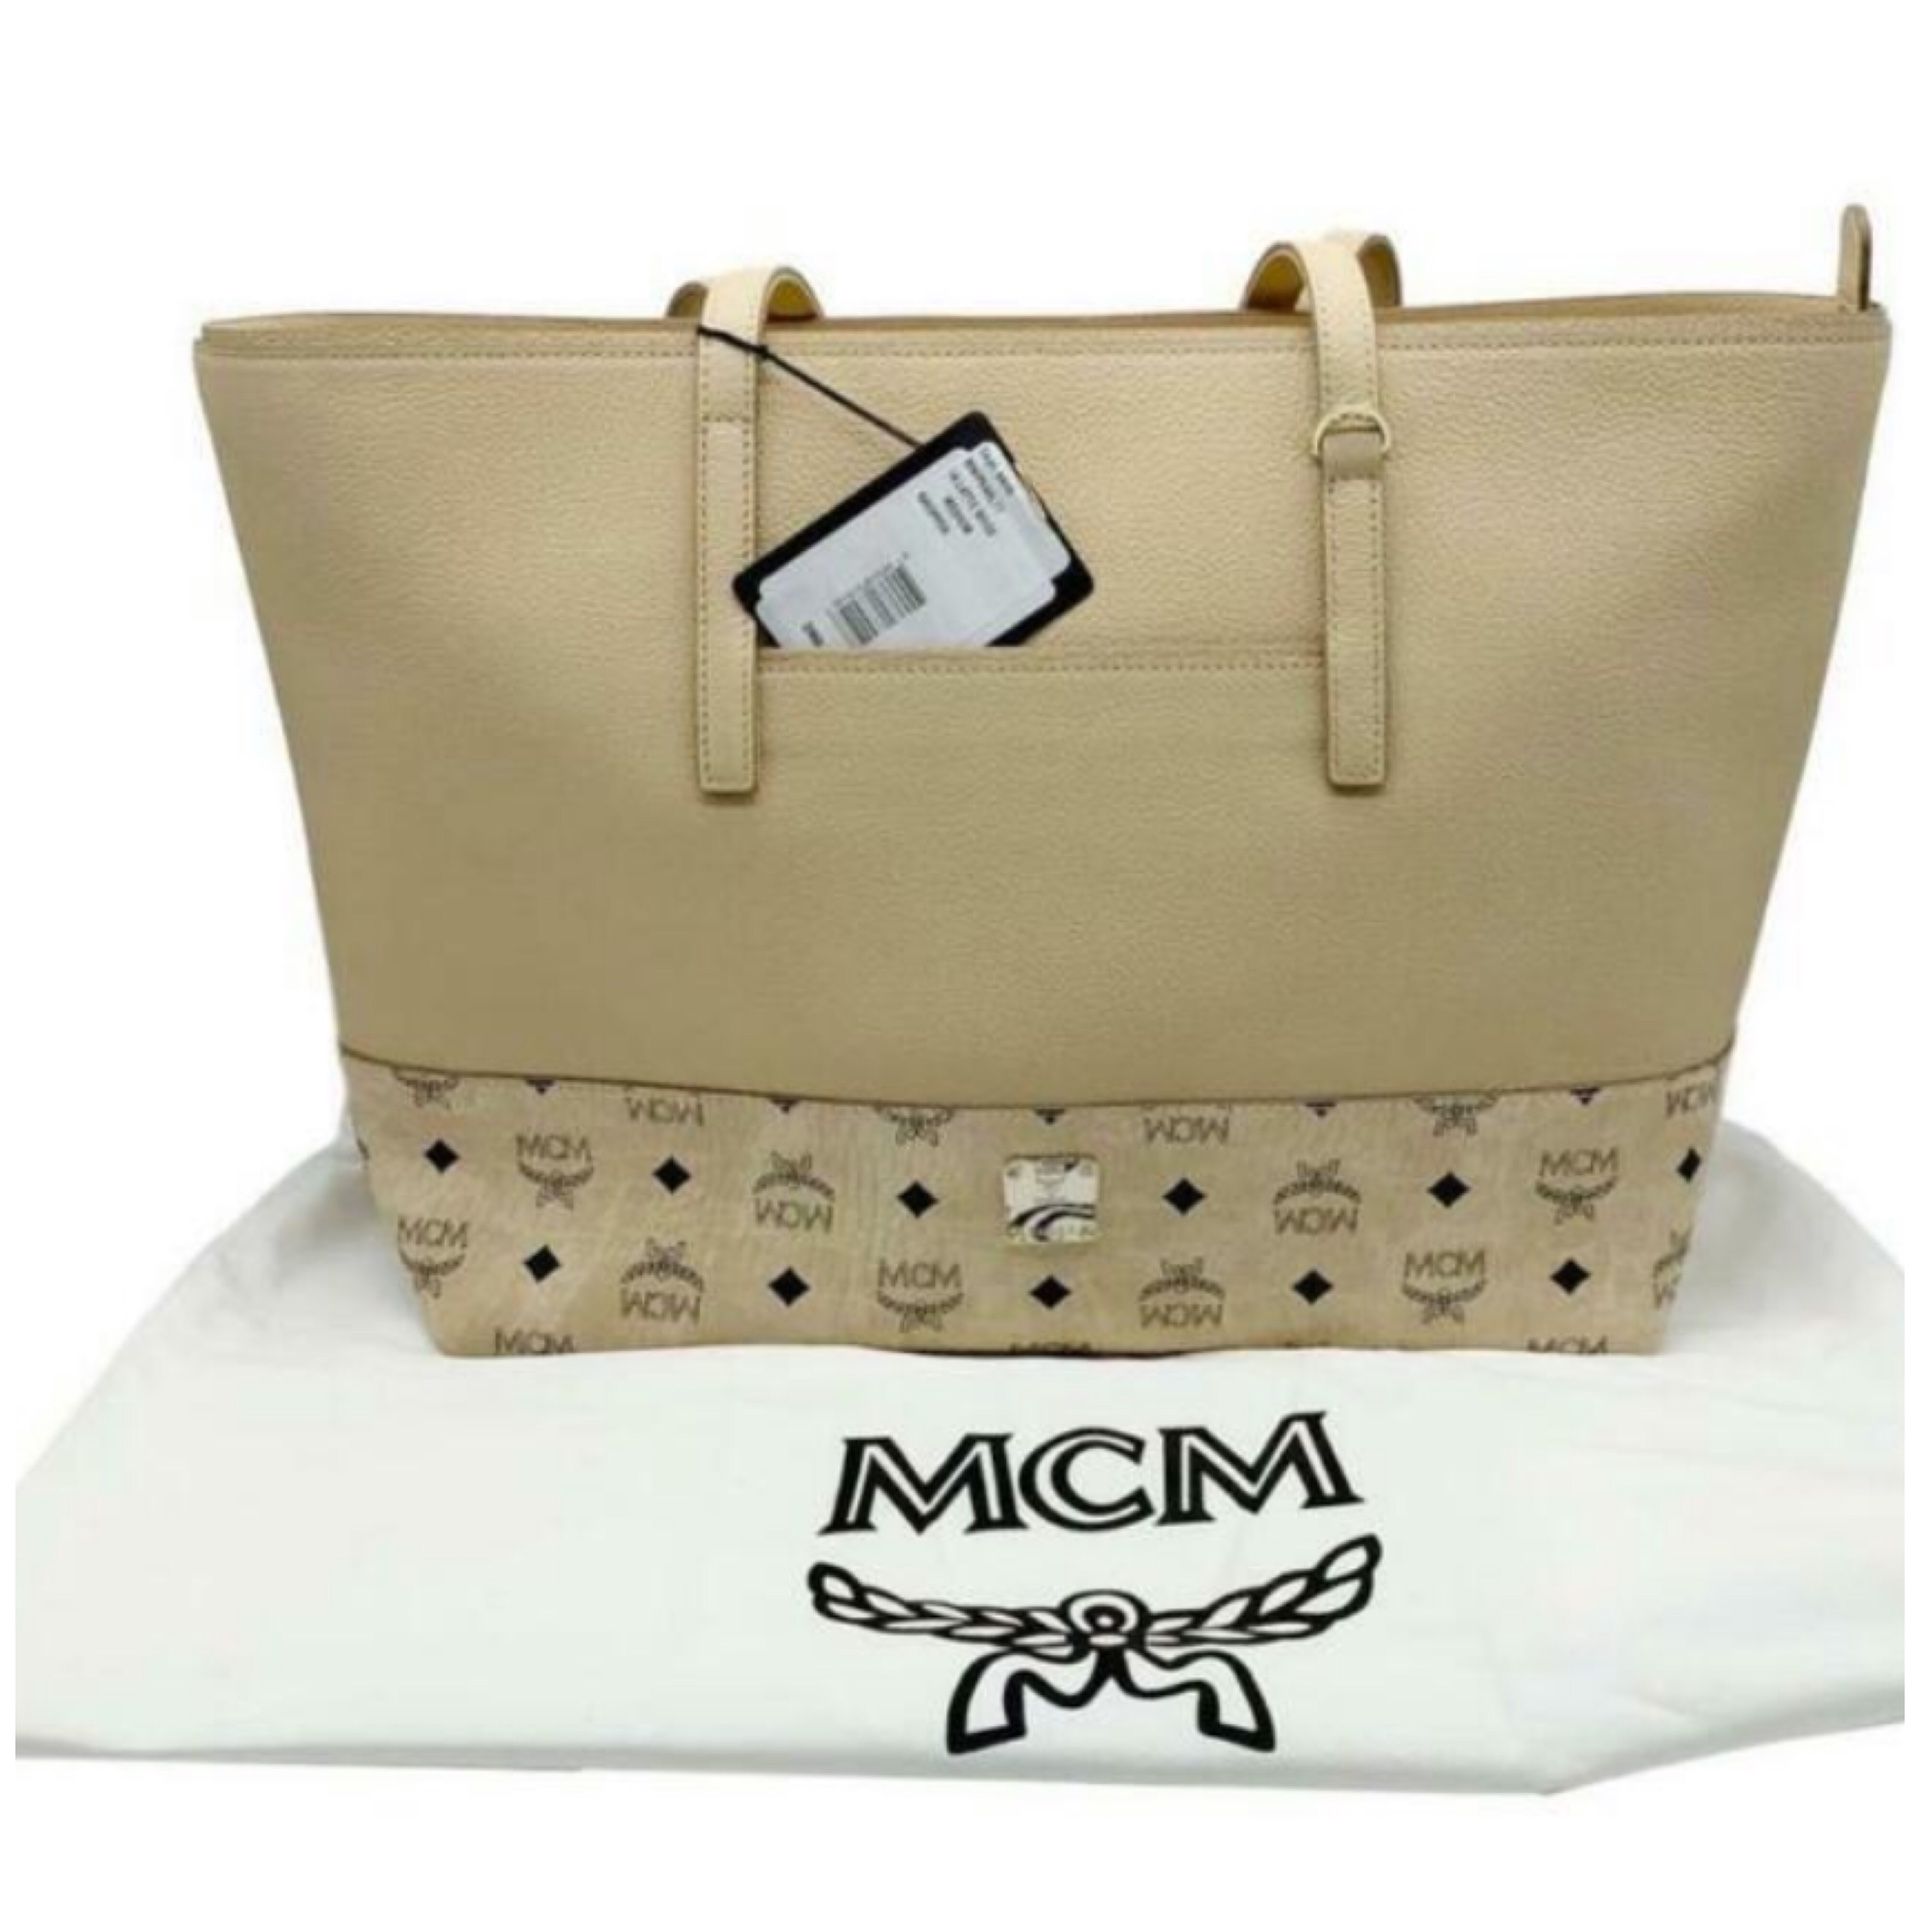 Mcm authentic women’s handbag brand new with tags and dust bag for 490$ only great deal retails for 950$ plus taxes perfect Christmas gift